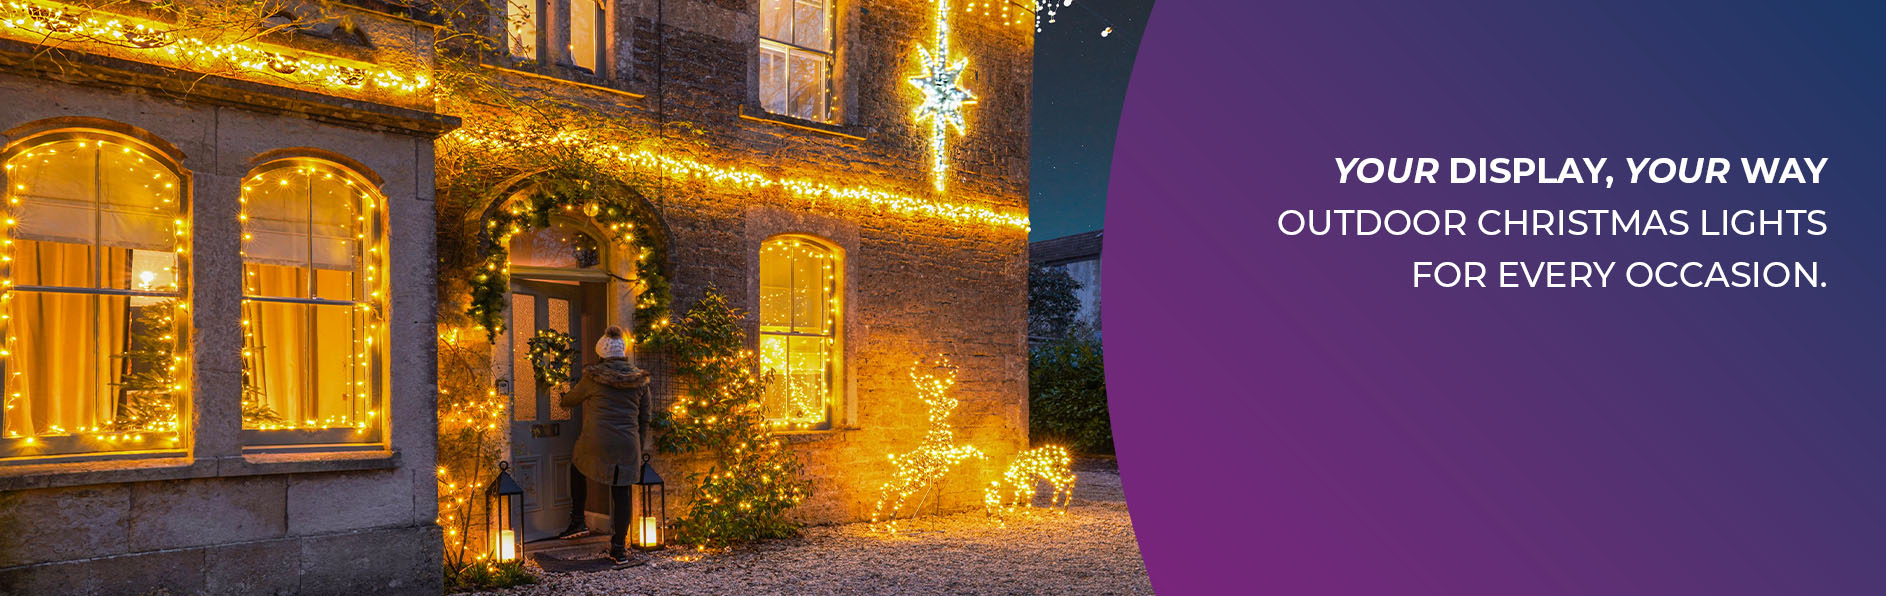 Outdoor Christmas lights for every occasion